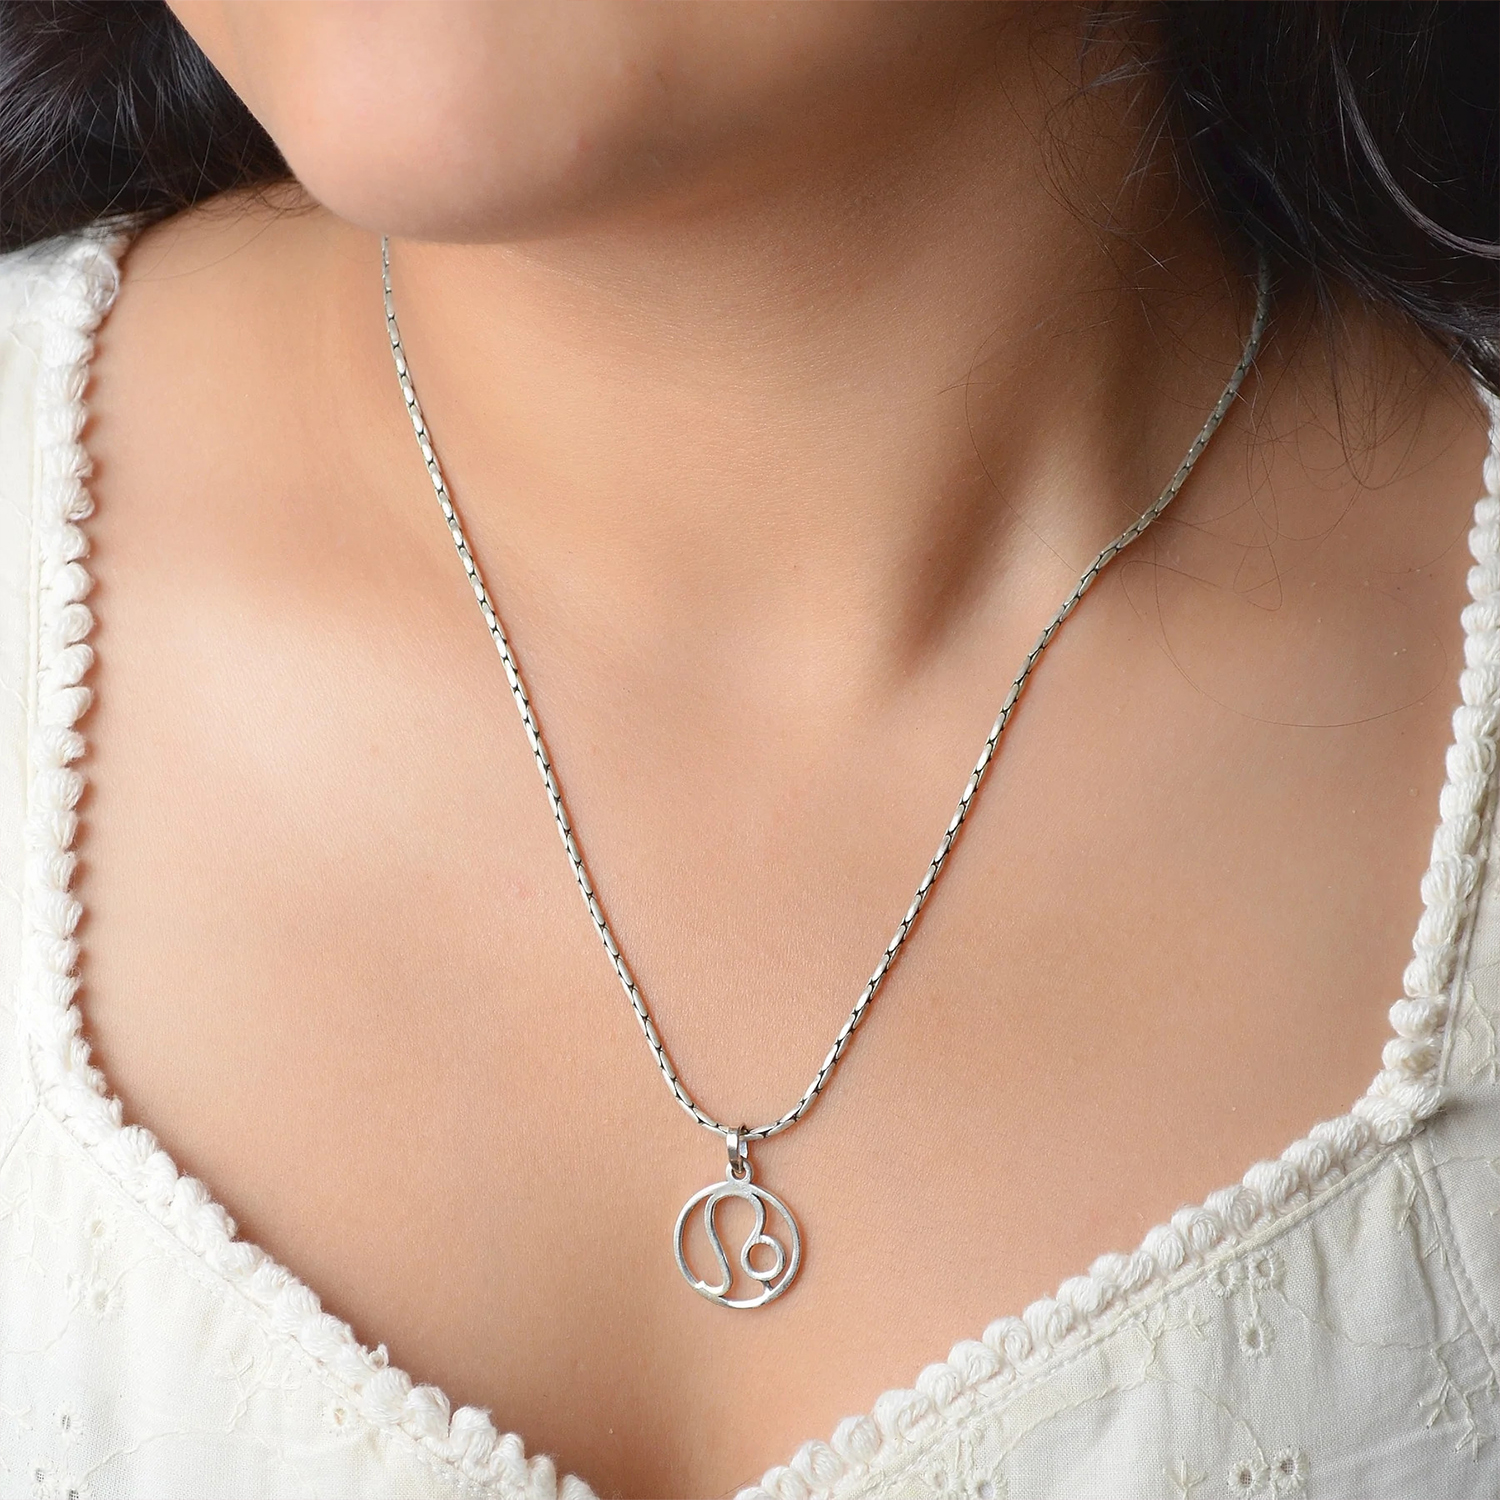 CANCER ZODIAC NECKLACE (STERLING SILVER) – KIRSTIN ASH (New Zealand)